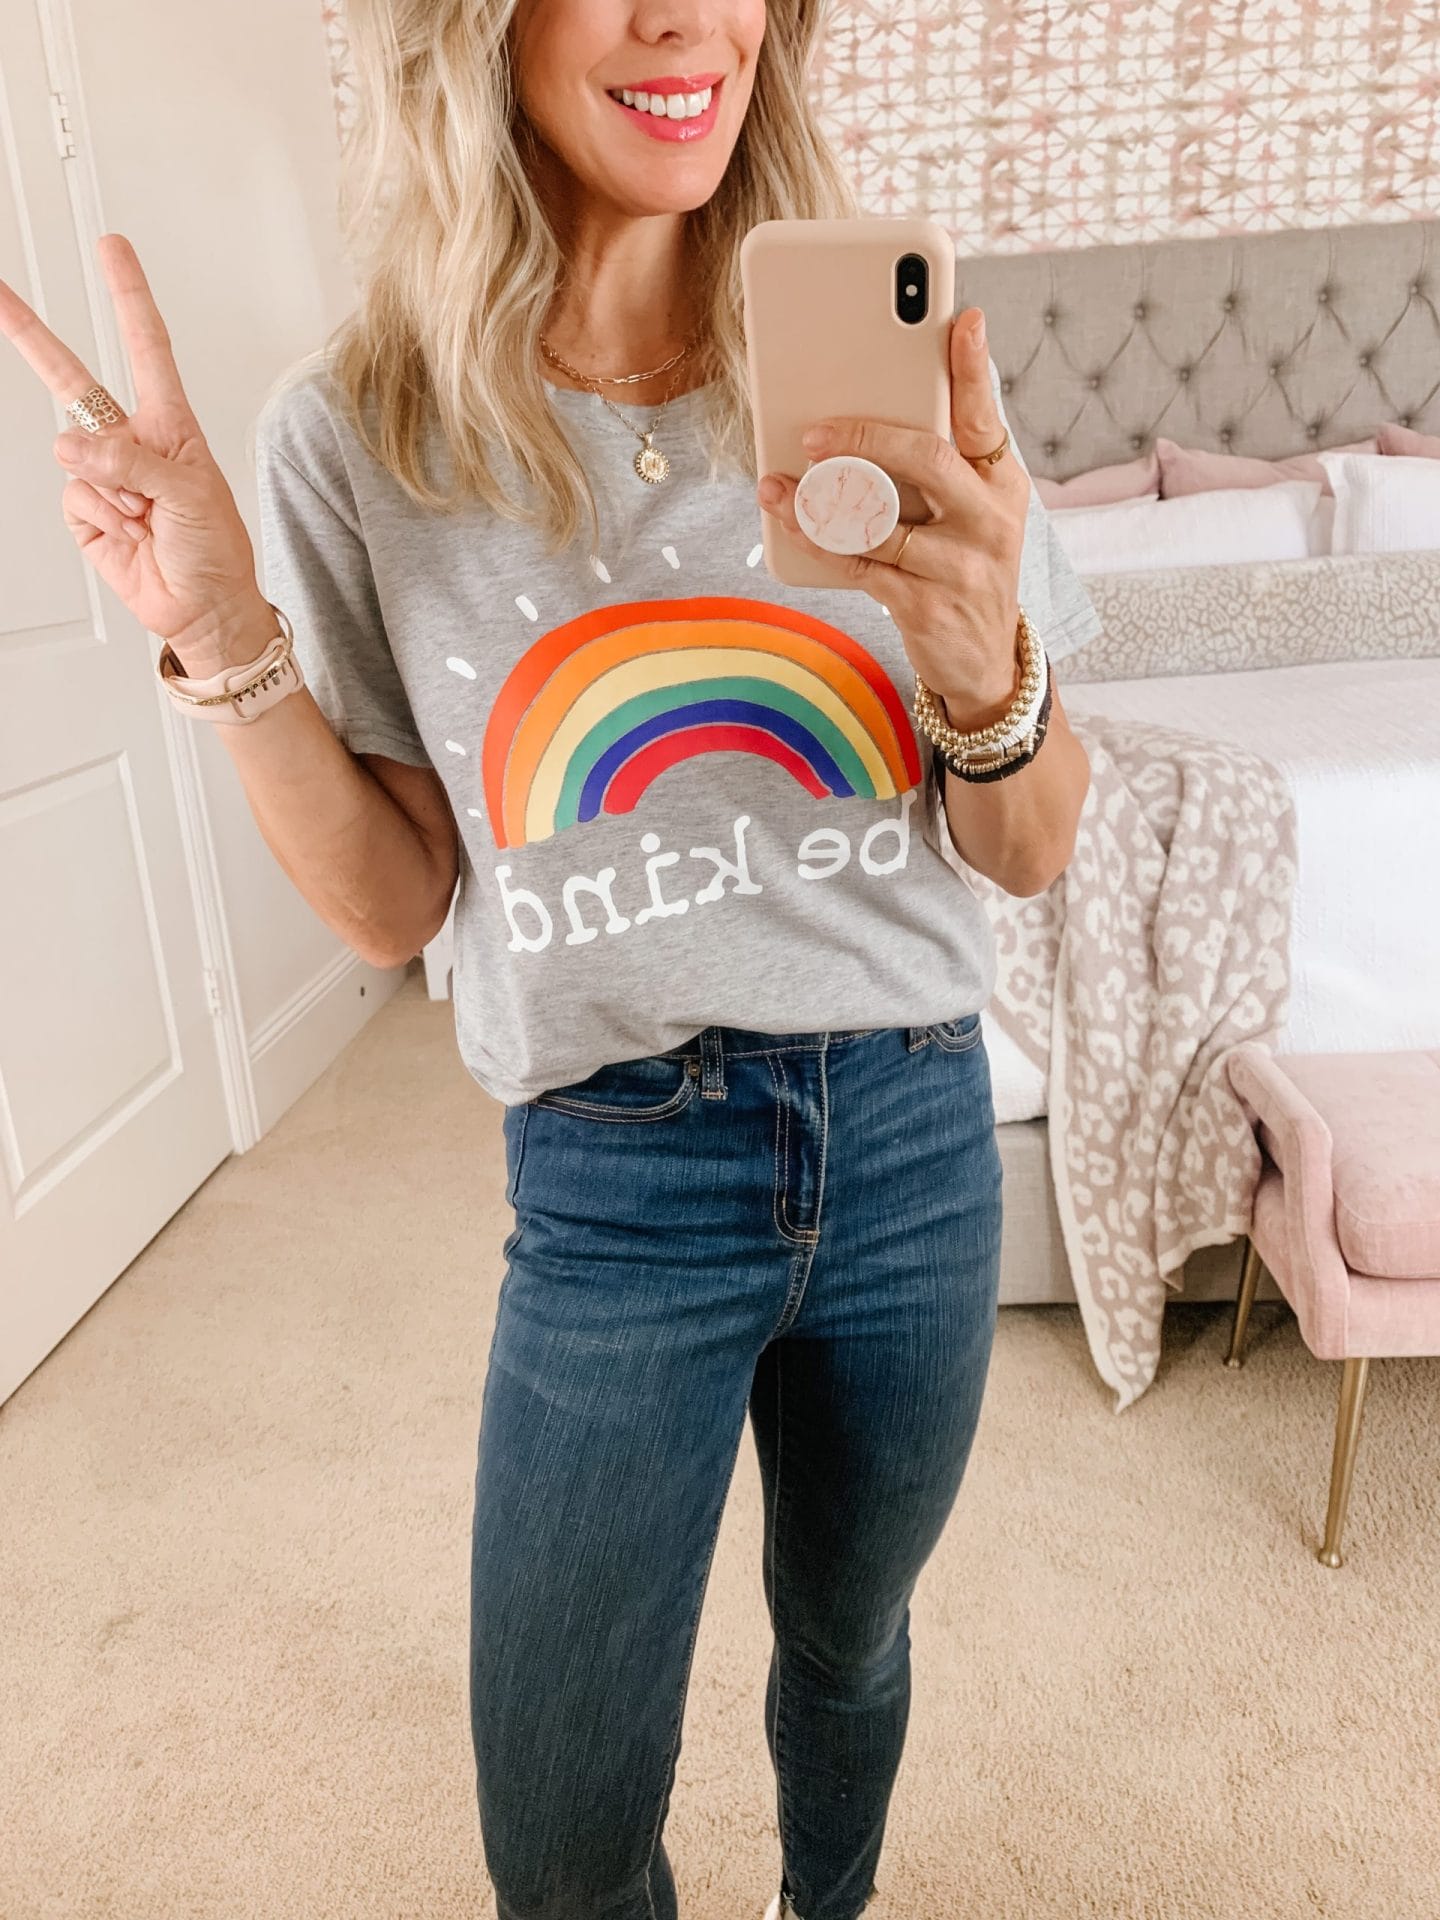 Amazon skinny jeans and be kind tee